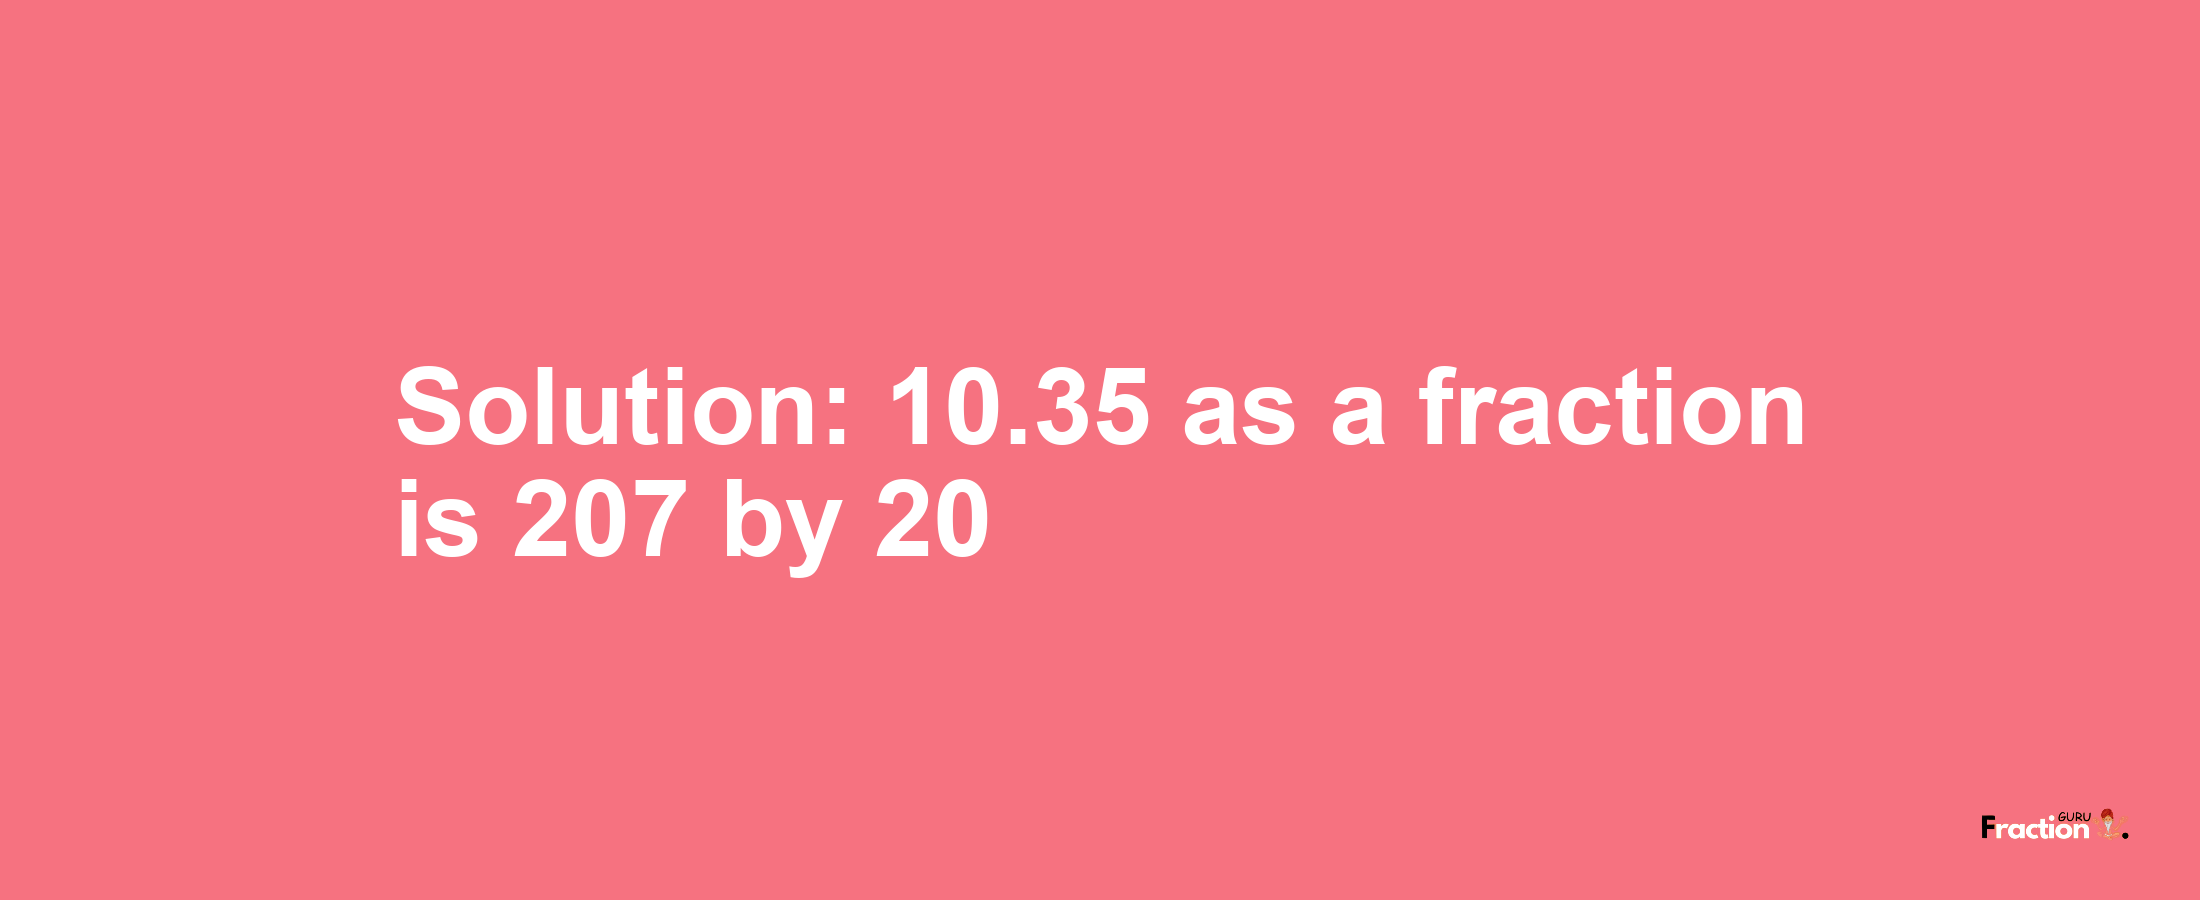 Solution:10.35 as a fraction is 207/20